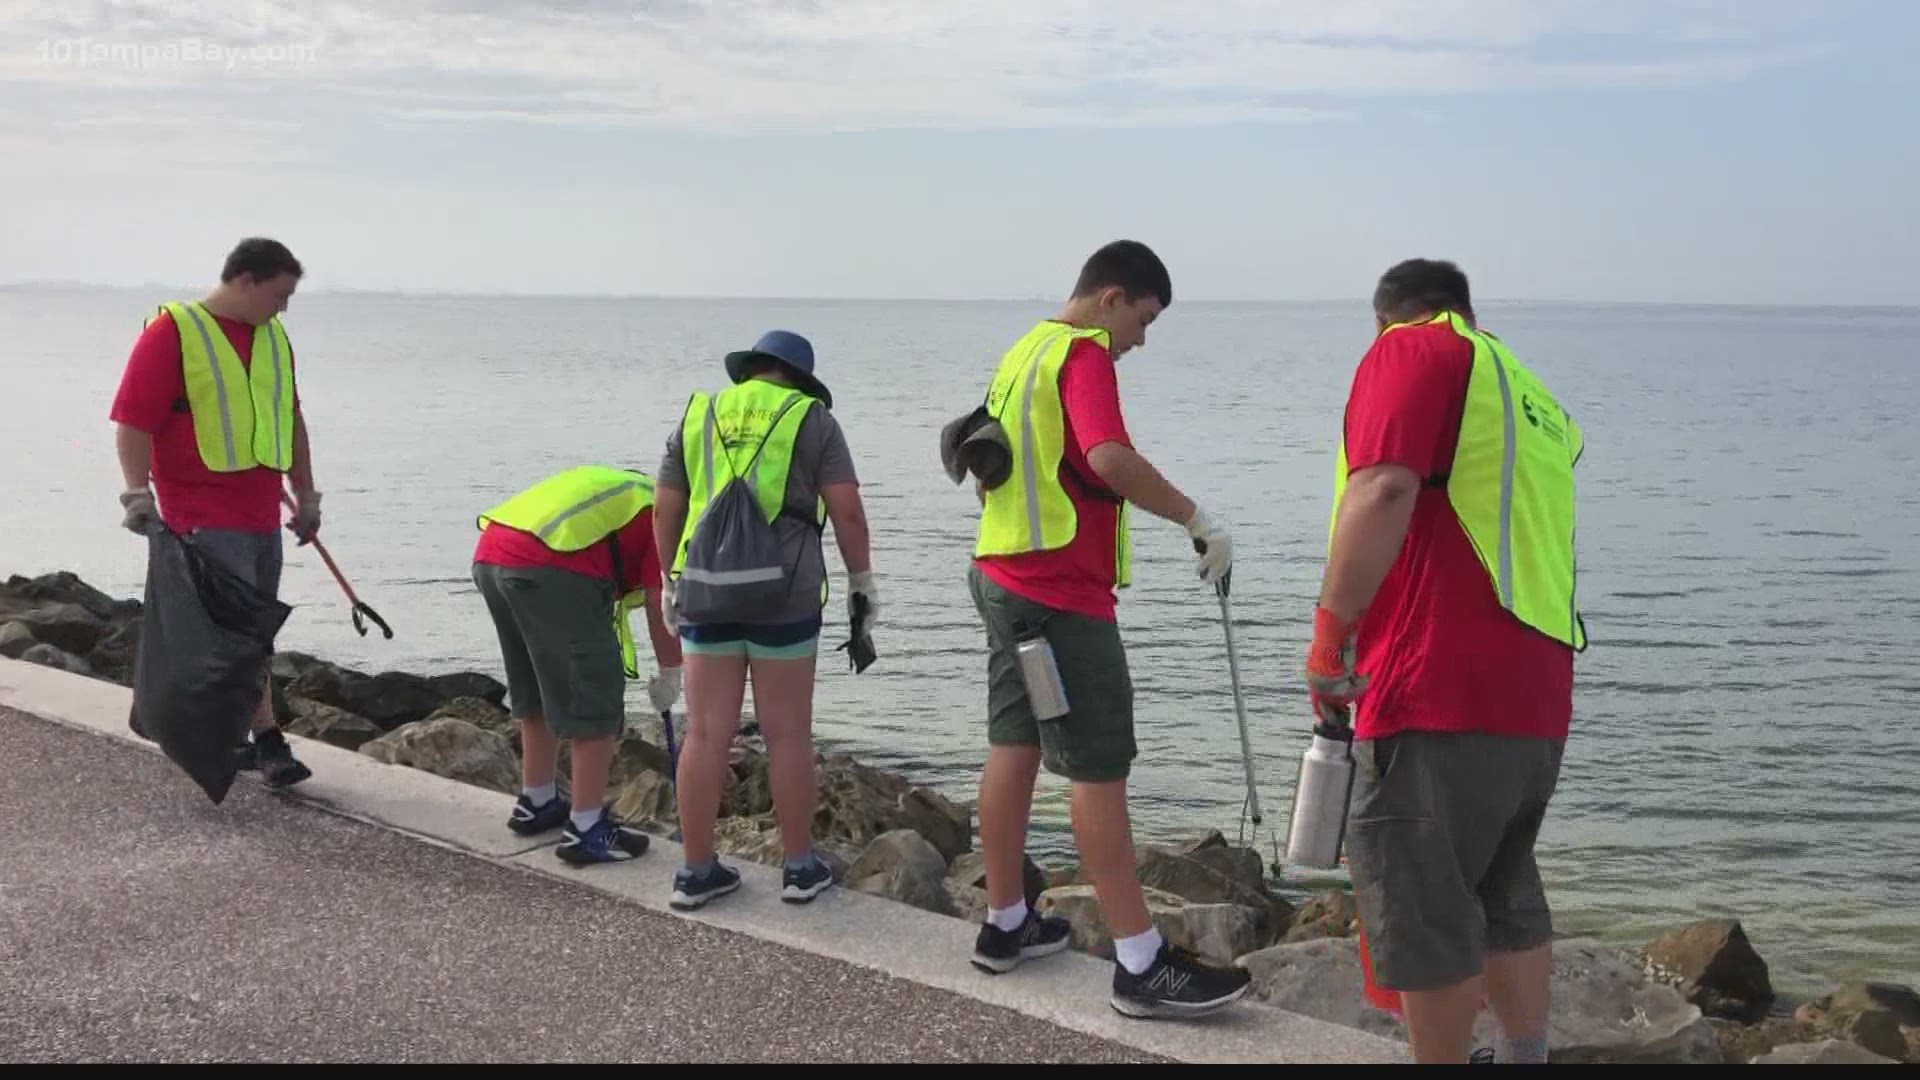 Volunteers combed beaches to collect trash after Boom on the Bay fireworks show.